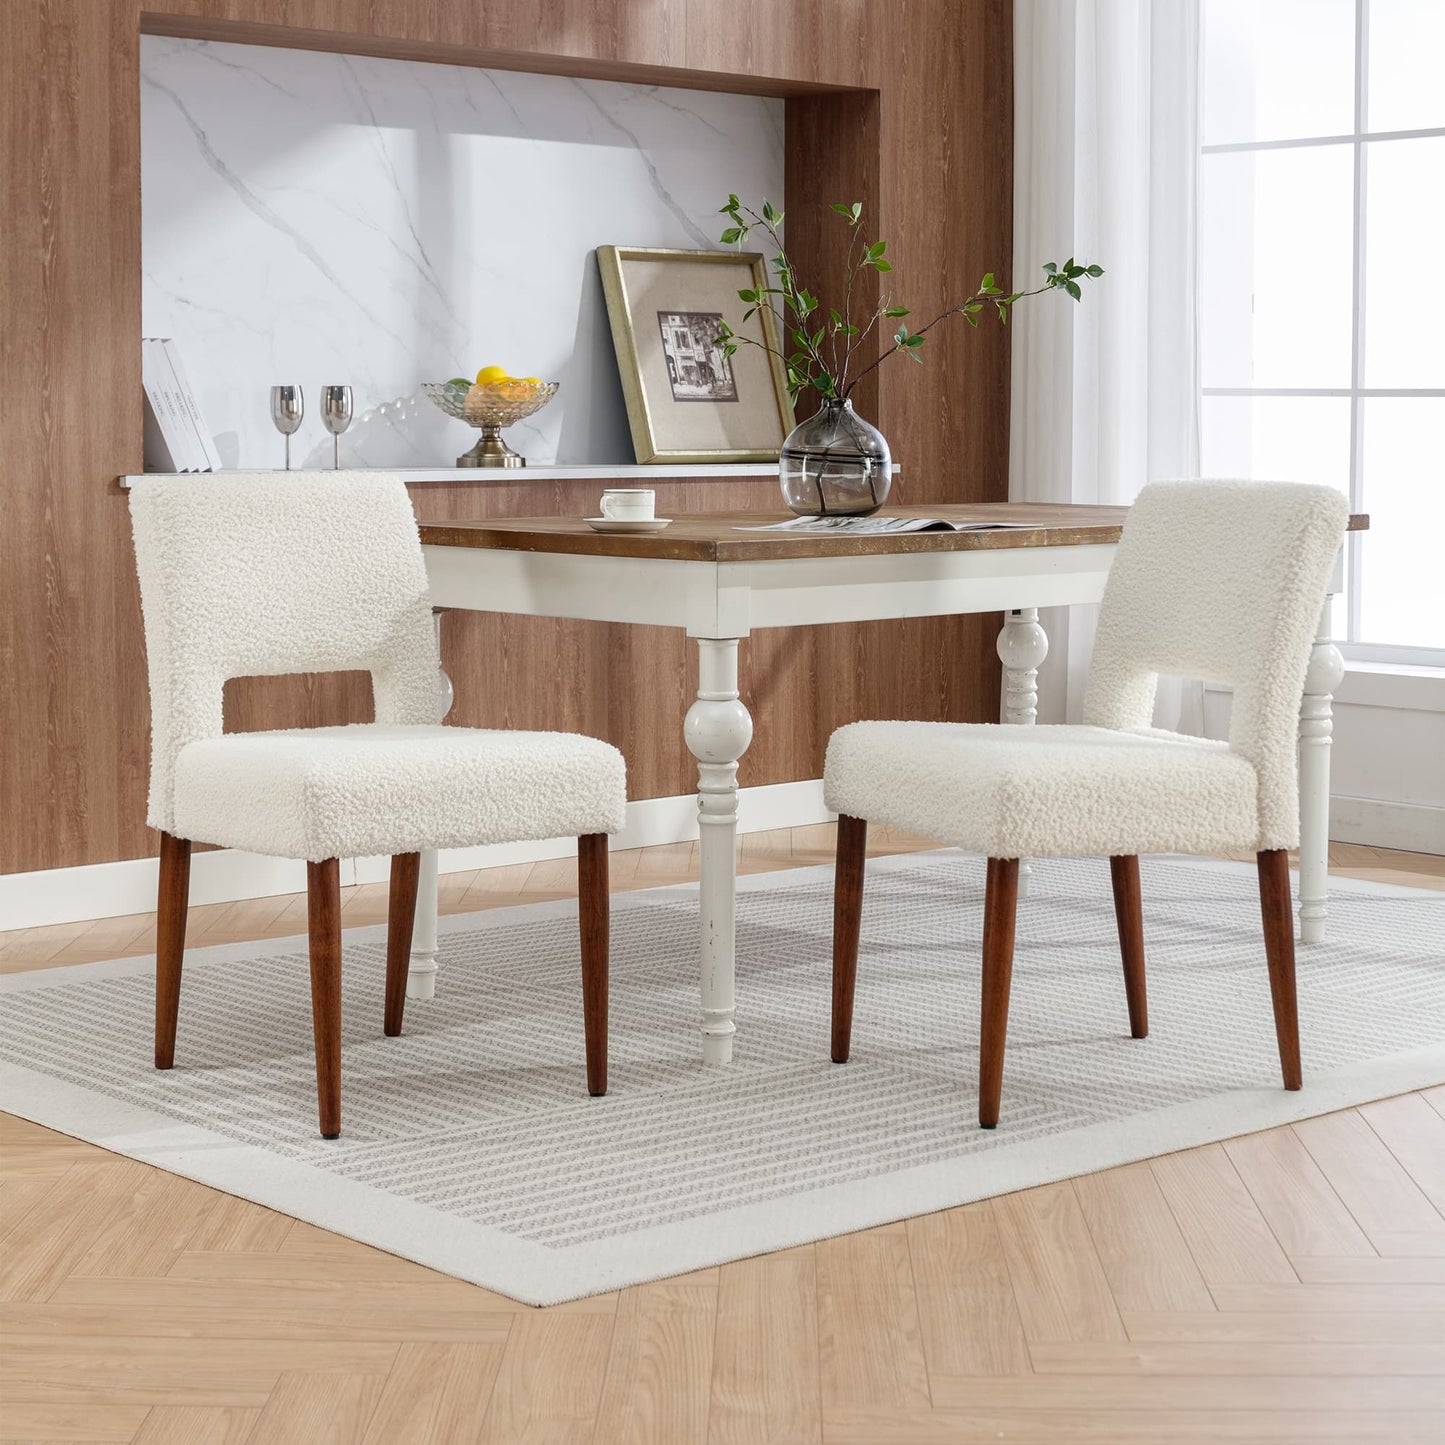 SogesPower Accent Chairs Set of 2, Velvet Chairs with Solid Wood and Upholstered- Cream